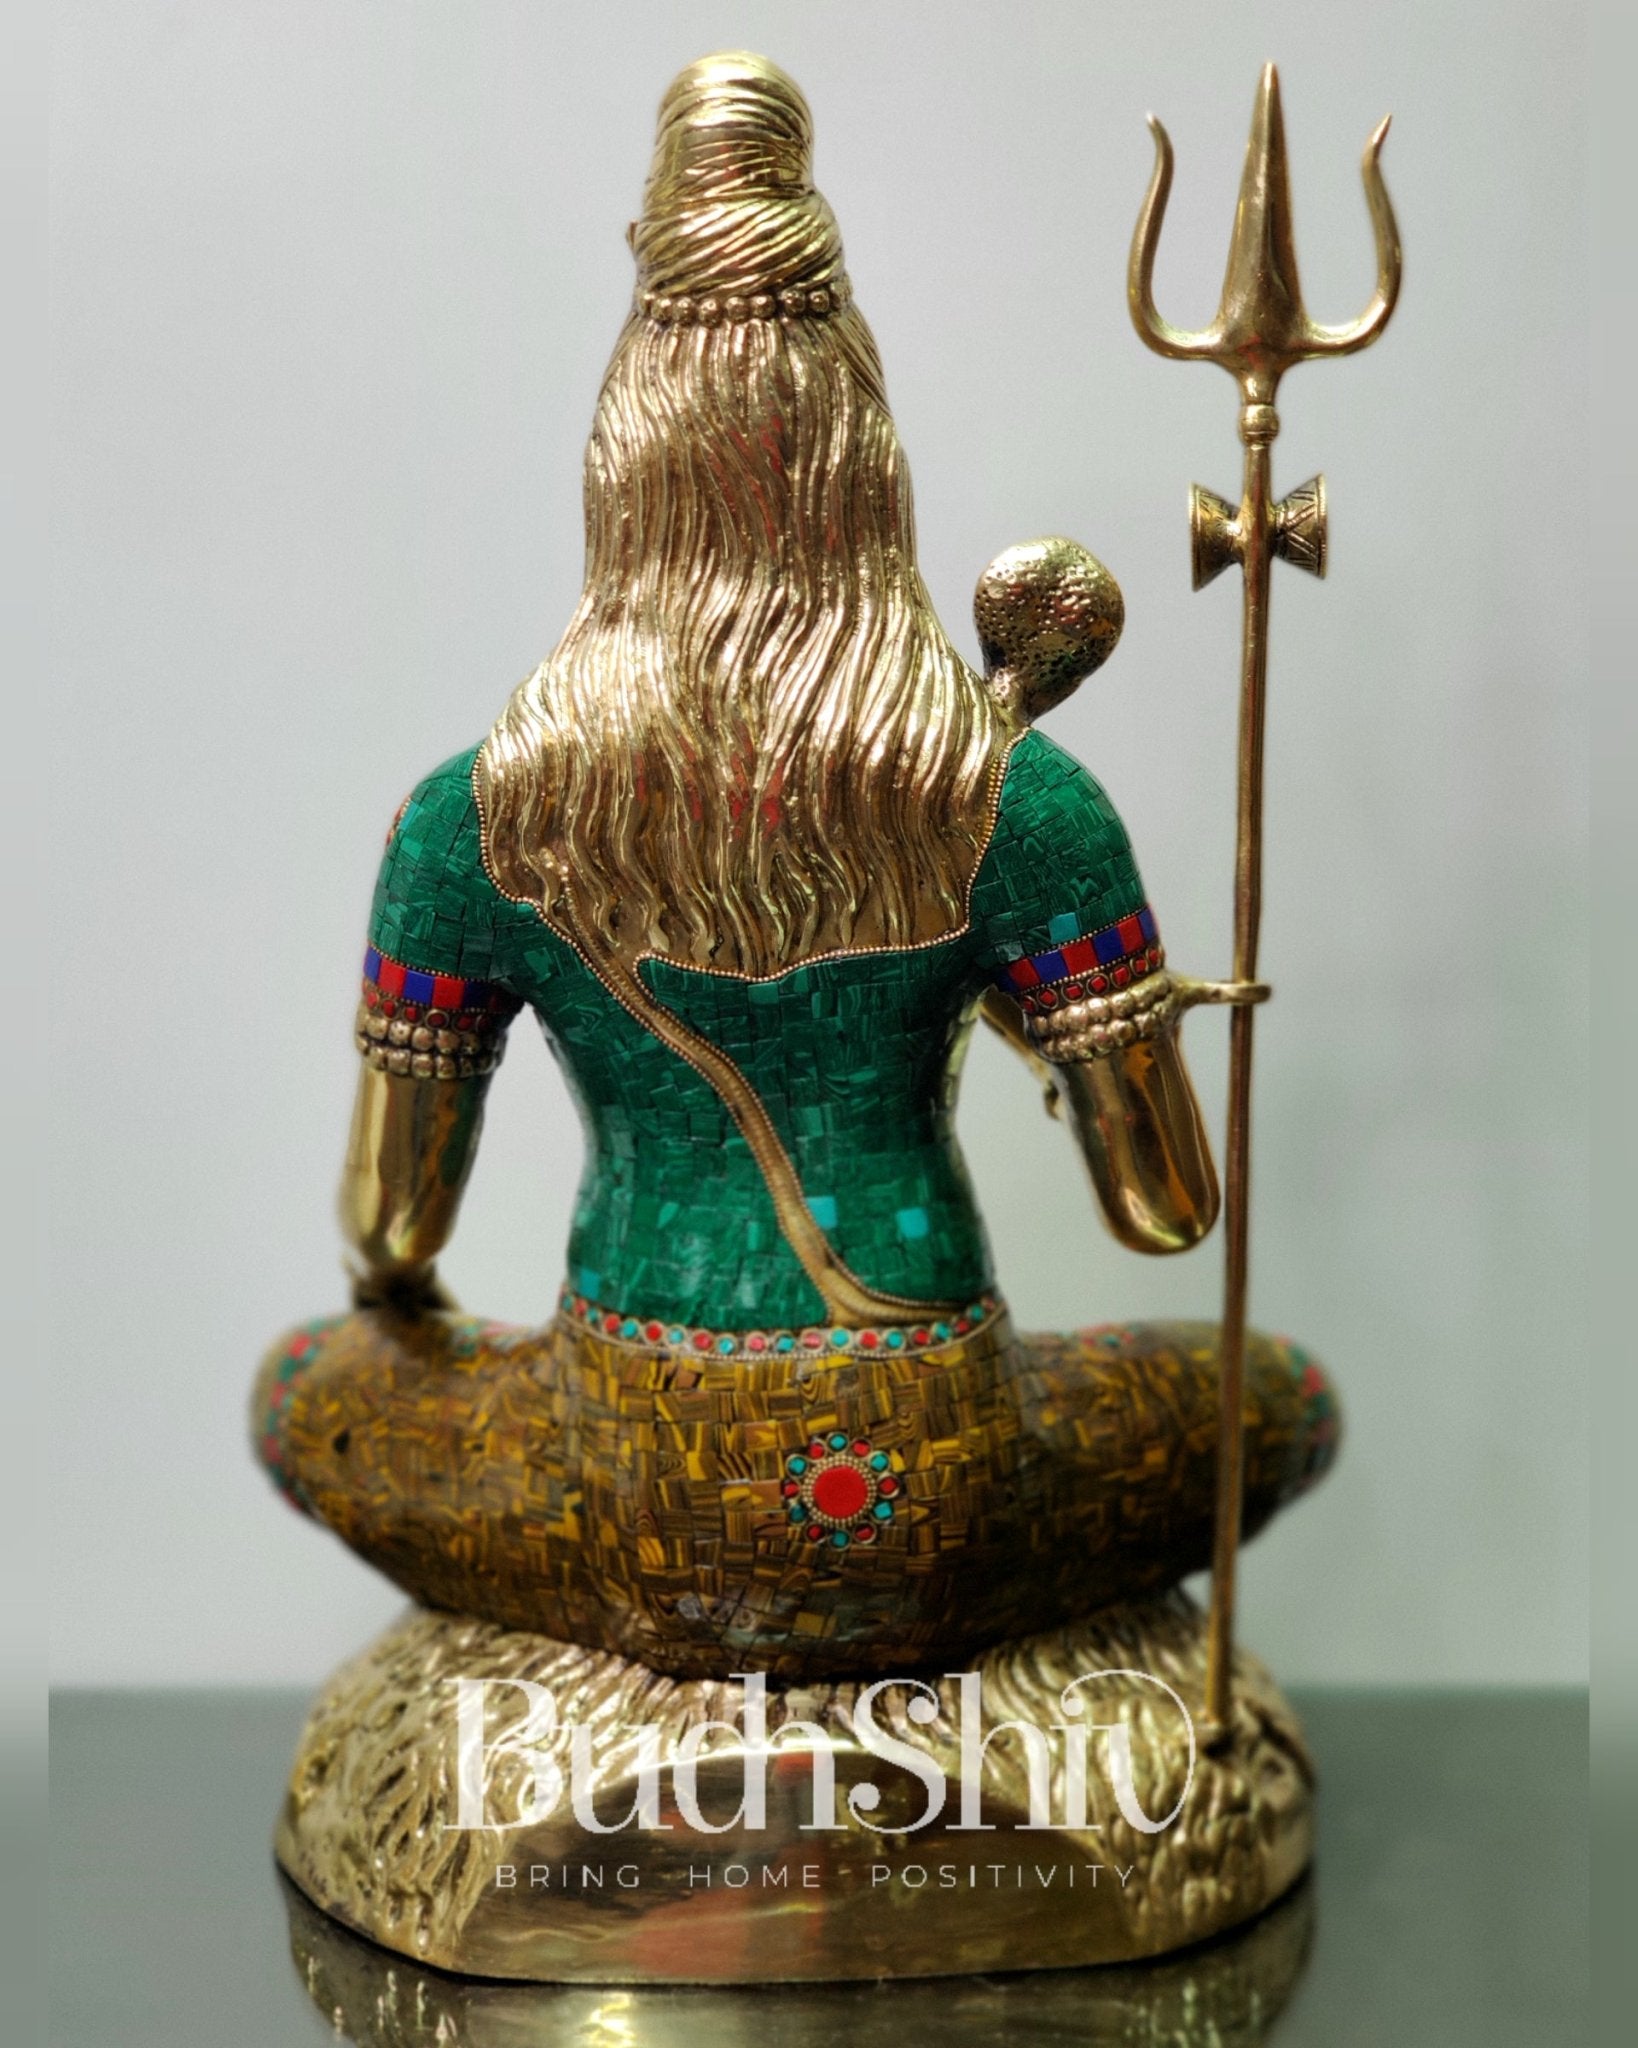 Lord Shiva Brass Idol 22 inches Lacquer Polished with stonework - Budhshiv.com